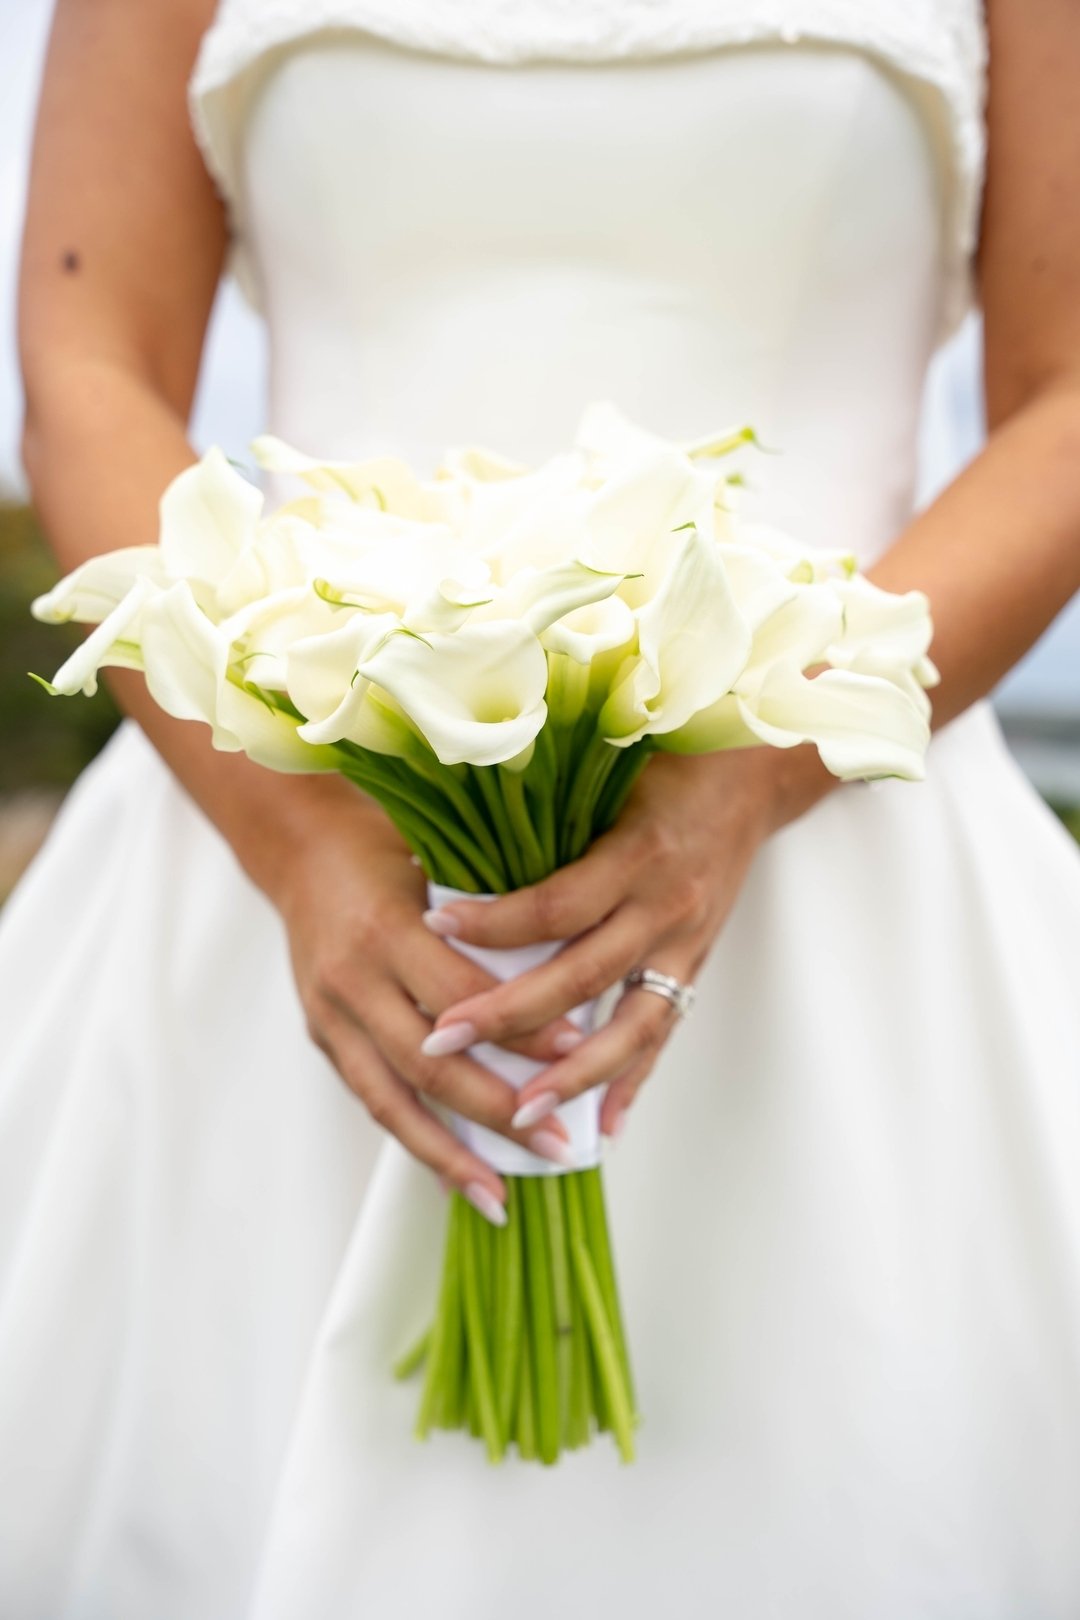 Capturing the essence of love and new beginnings, this bride's bouquet of white calla lilies is a symbol of delicacy and poise.

Planner: @jordanmichelleevents_ciera
Venue: @nissequogue_golf_club 
Florist: @flowersbyburton 
Photographer: @youngplantw